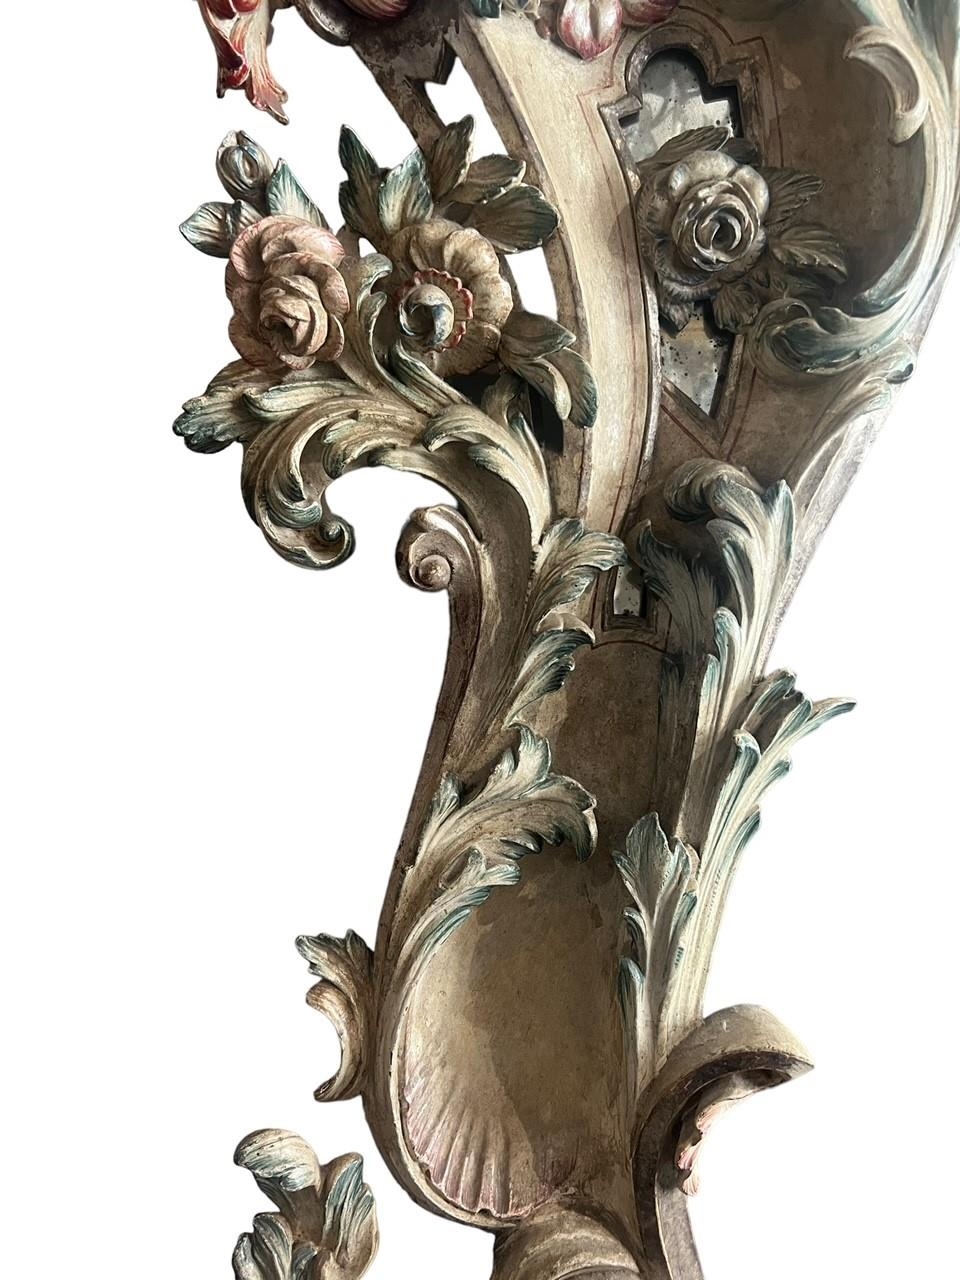 A VERY LARGE AND IMPRESSIVE 18TH CENTURY CARVED WOOD AND PAINTED ITALIAN VENETIAN ROCOCO MIRROR - Image 17 of 18